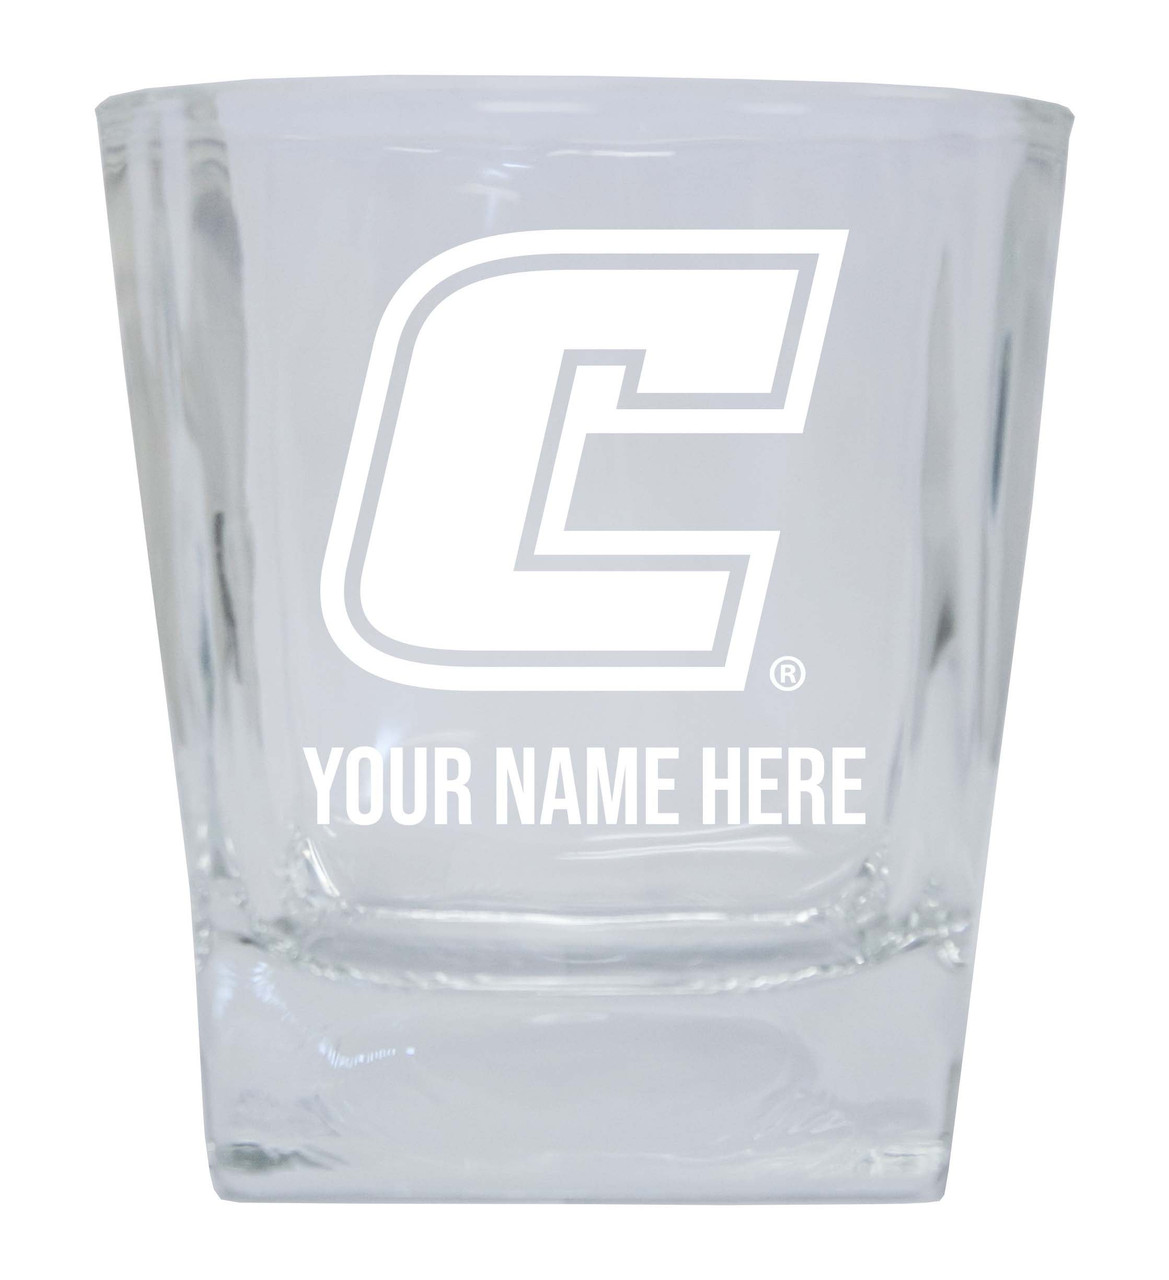 University of Tennessee at Chattanooga Custom College Etched Alumni 5oz Shooter Glass Tumbler 2 Pack